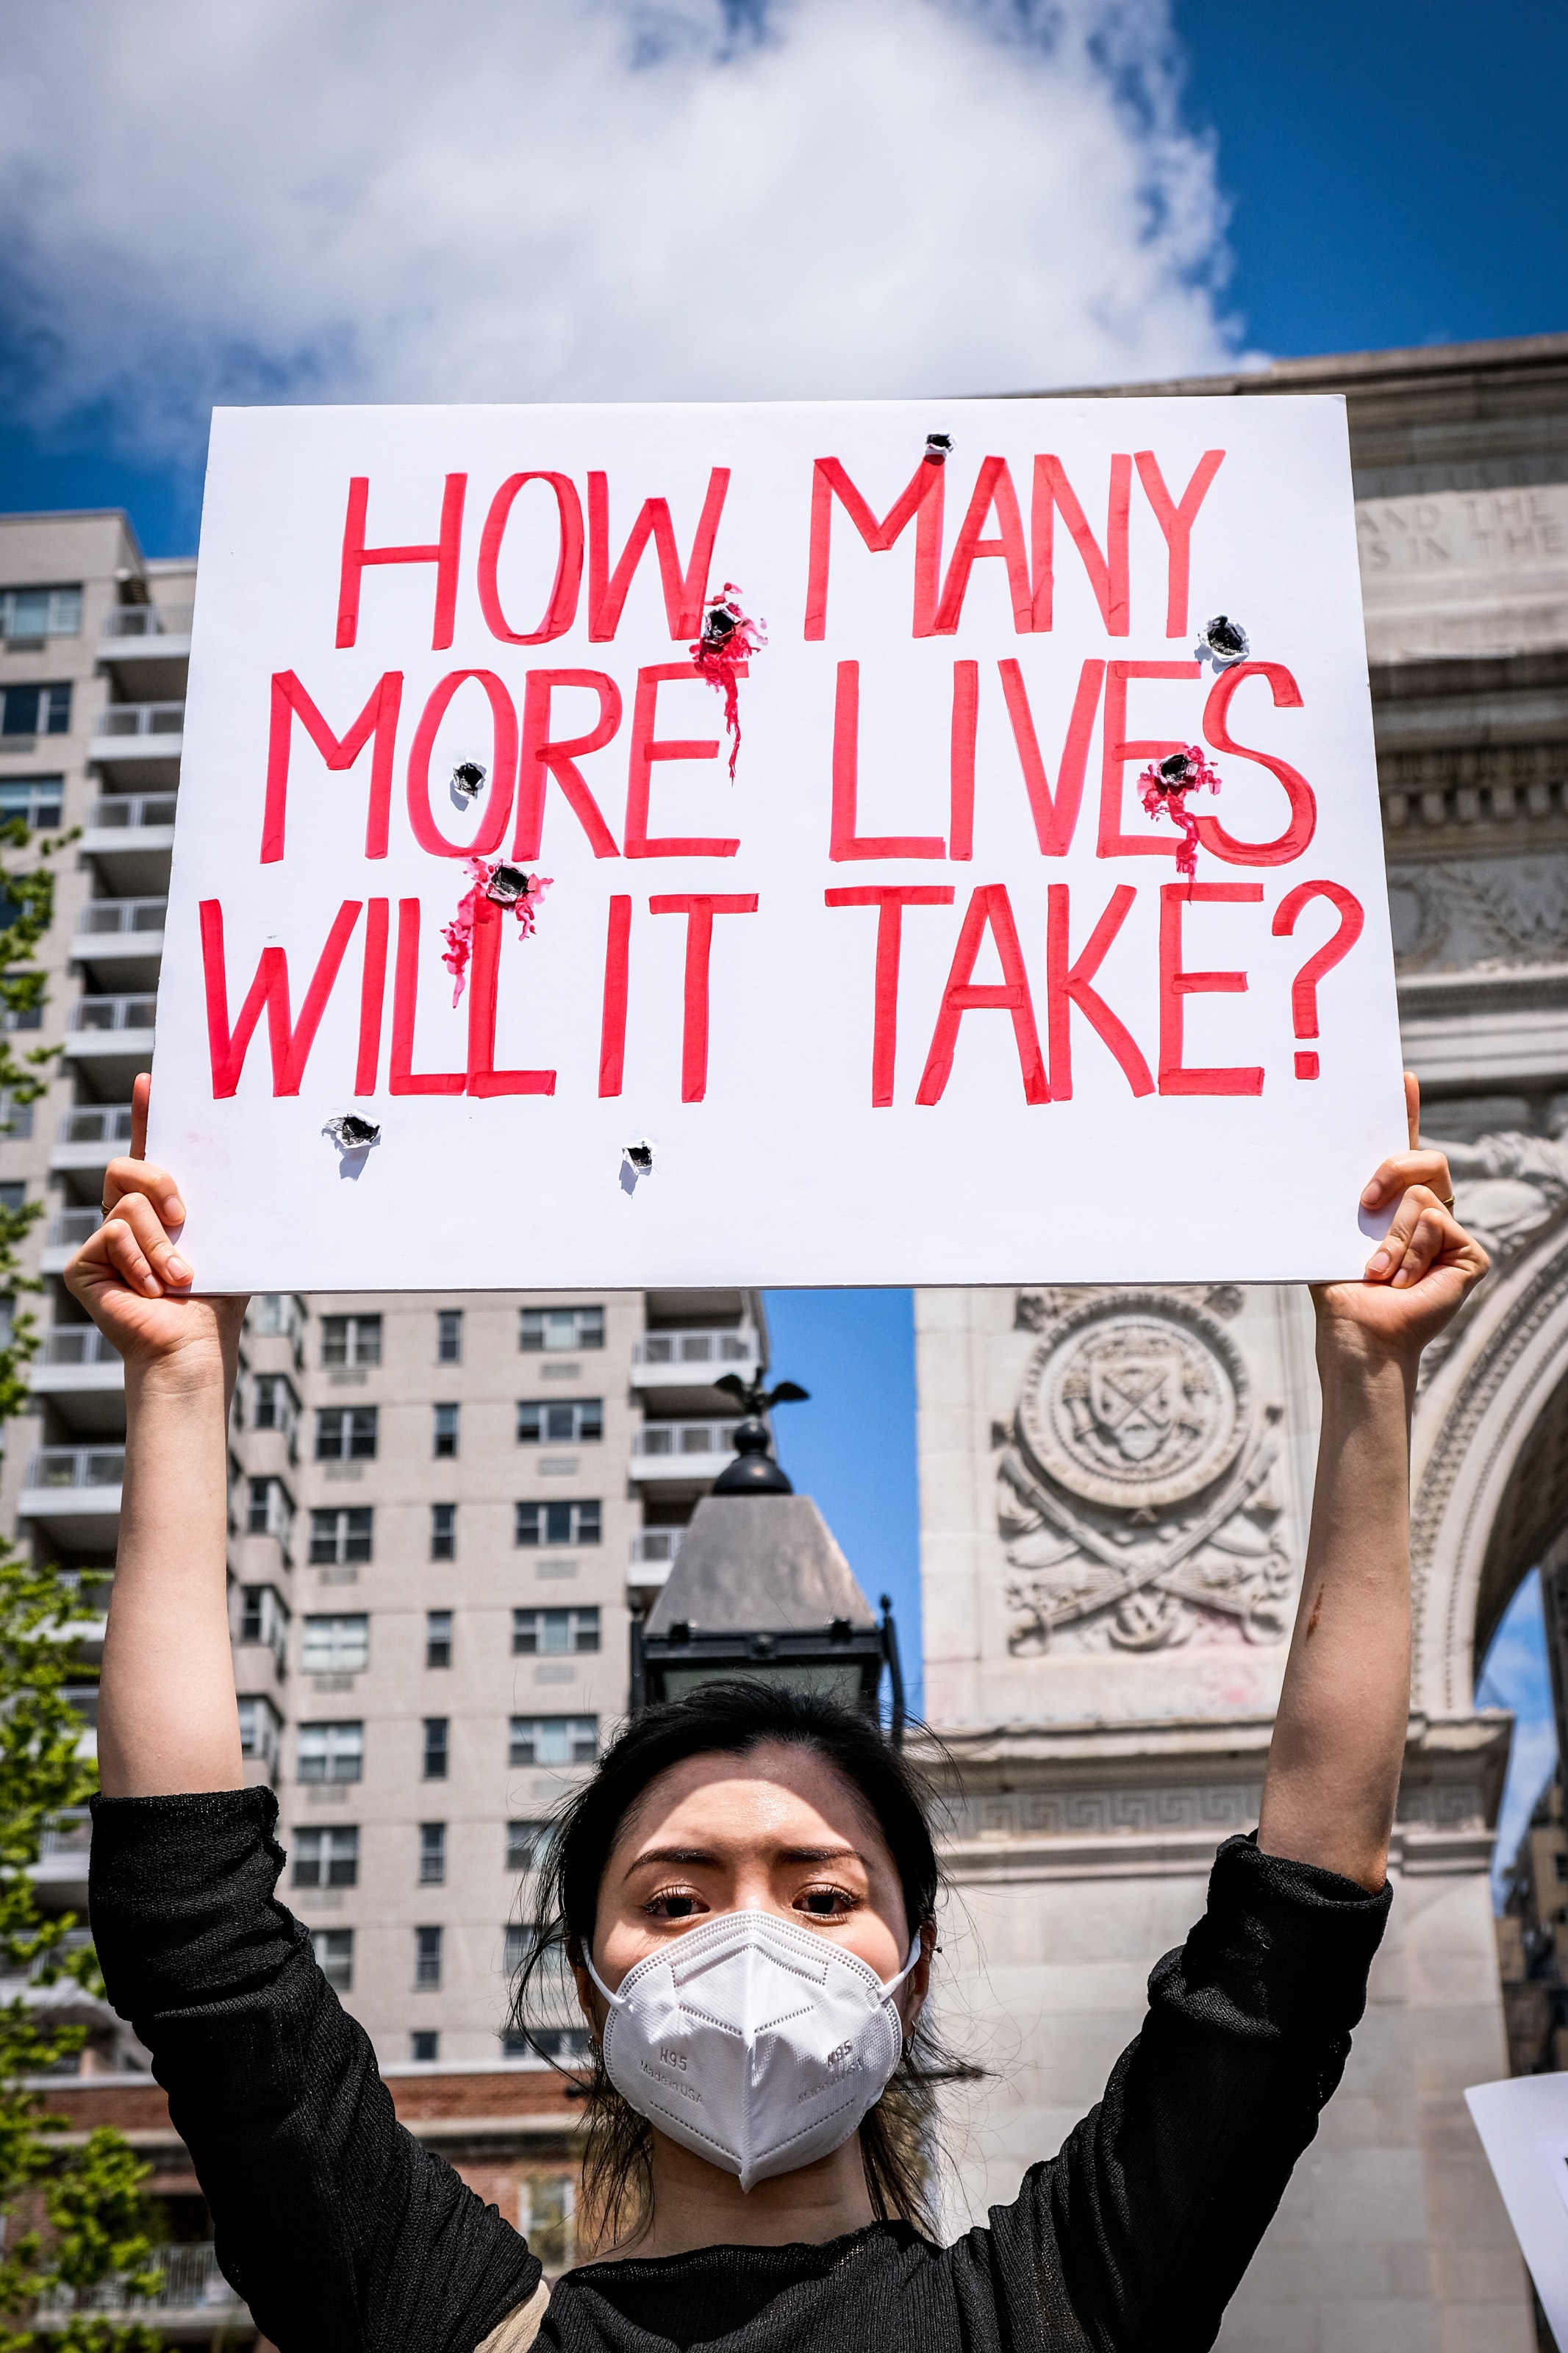 Man holding sign that reads "How man more lives will it take?"